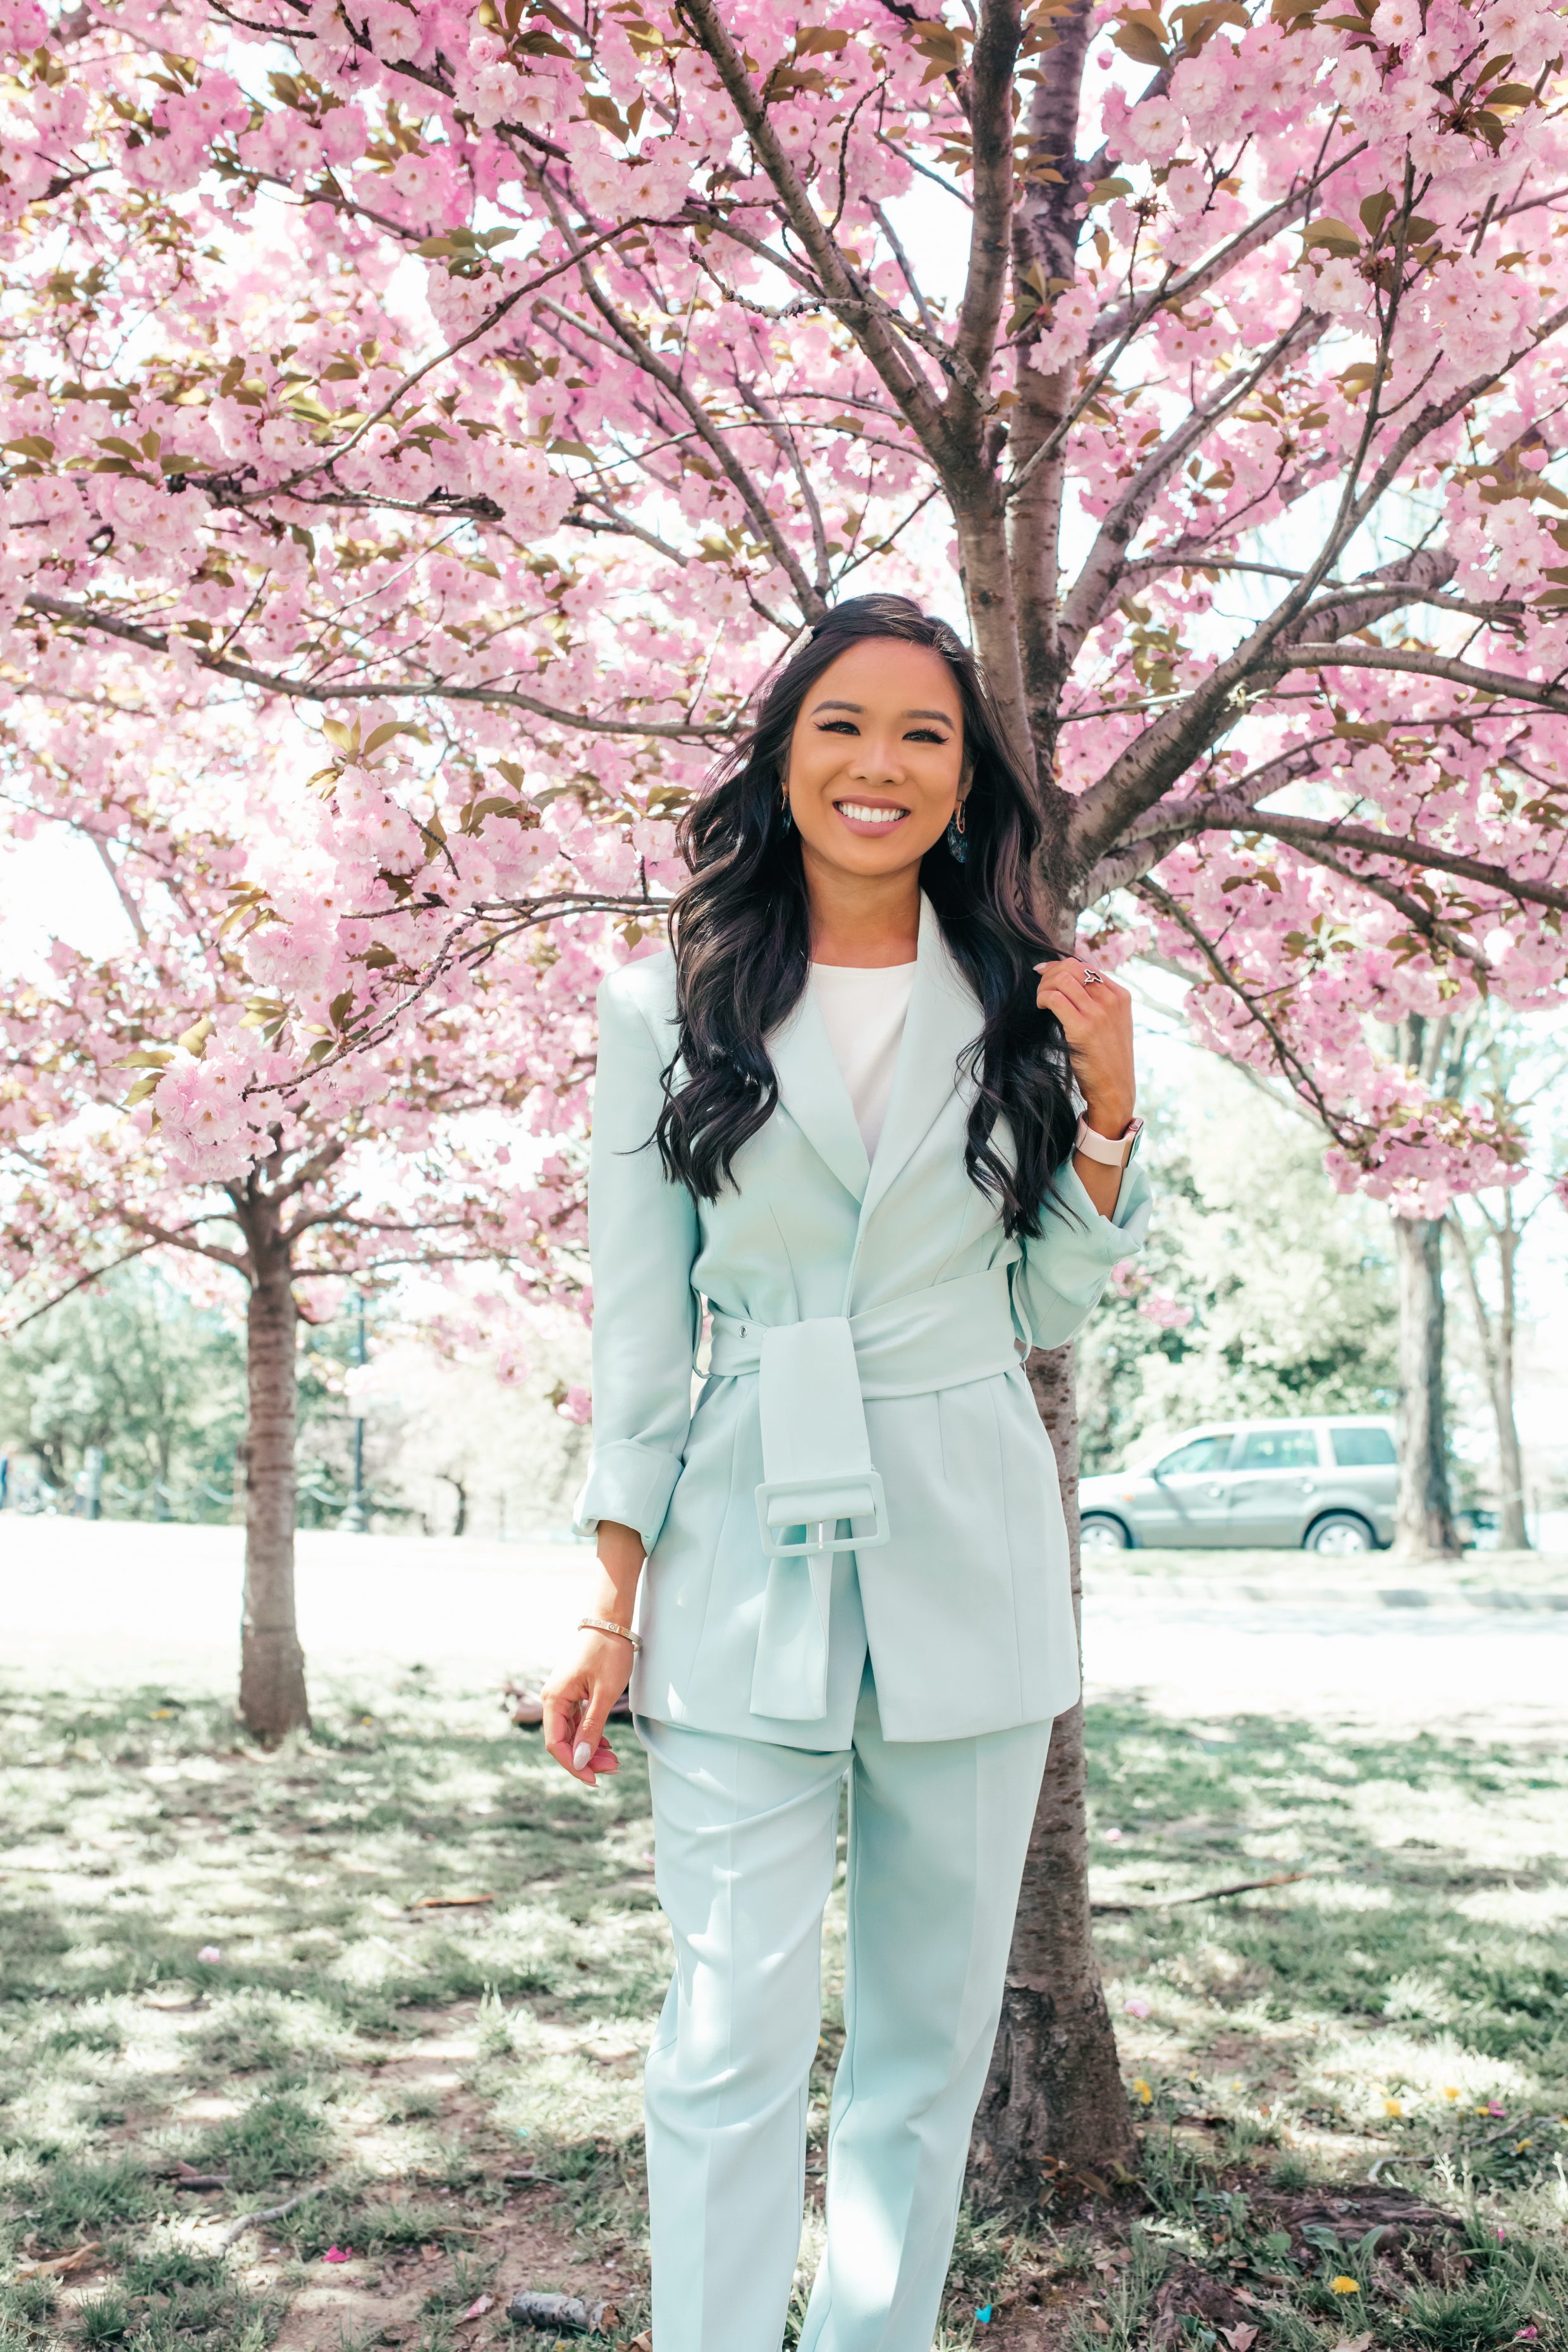 Hoang-Kim wears a mint green pantsuit to see Cherry Blossoms in Washington, D.C